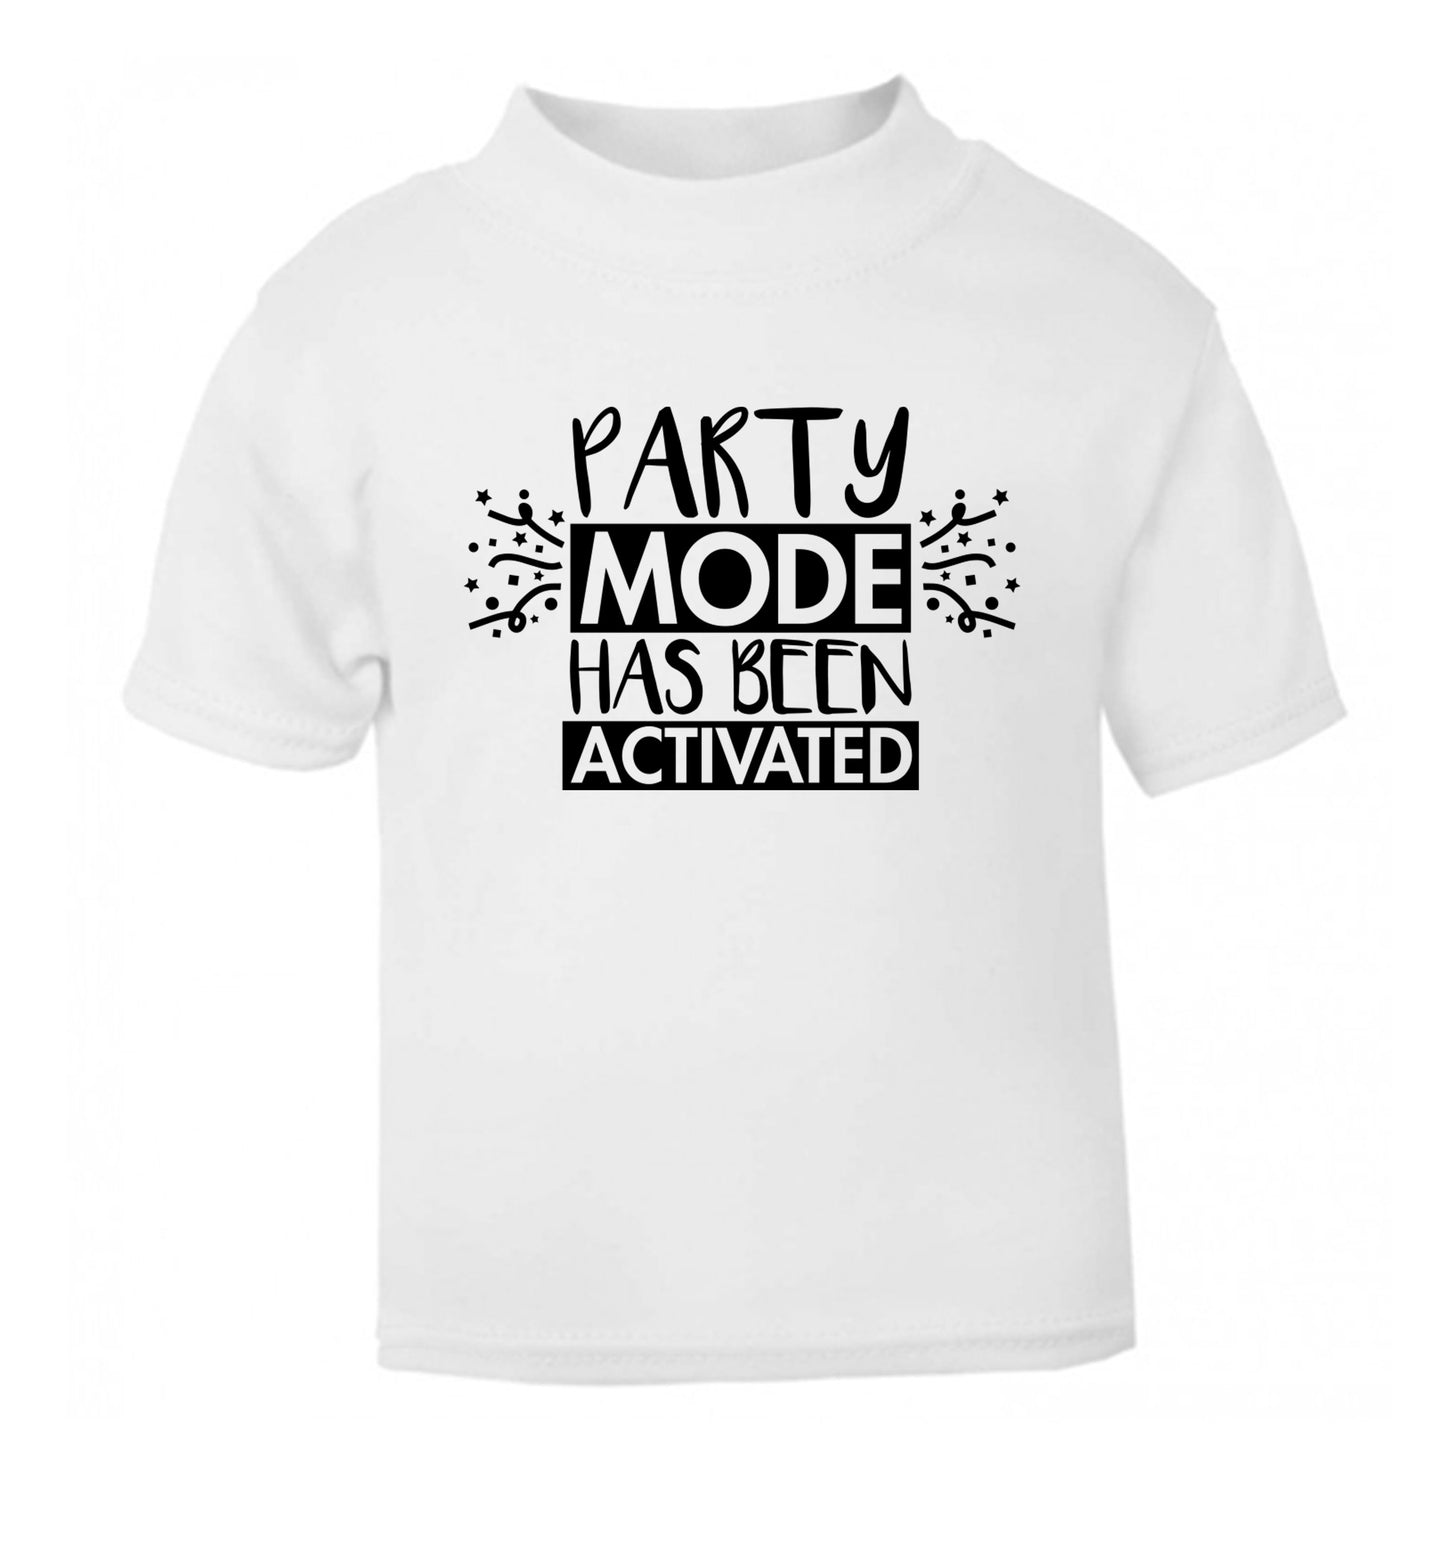 Please do not disturb party mode has been activated white Baby Toddler Tshirt 2 Years